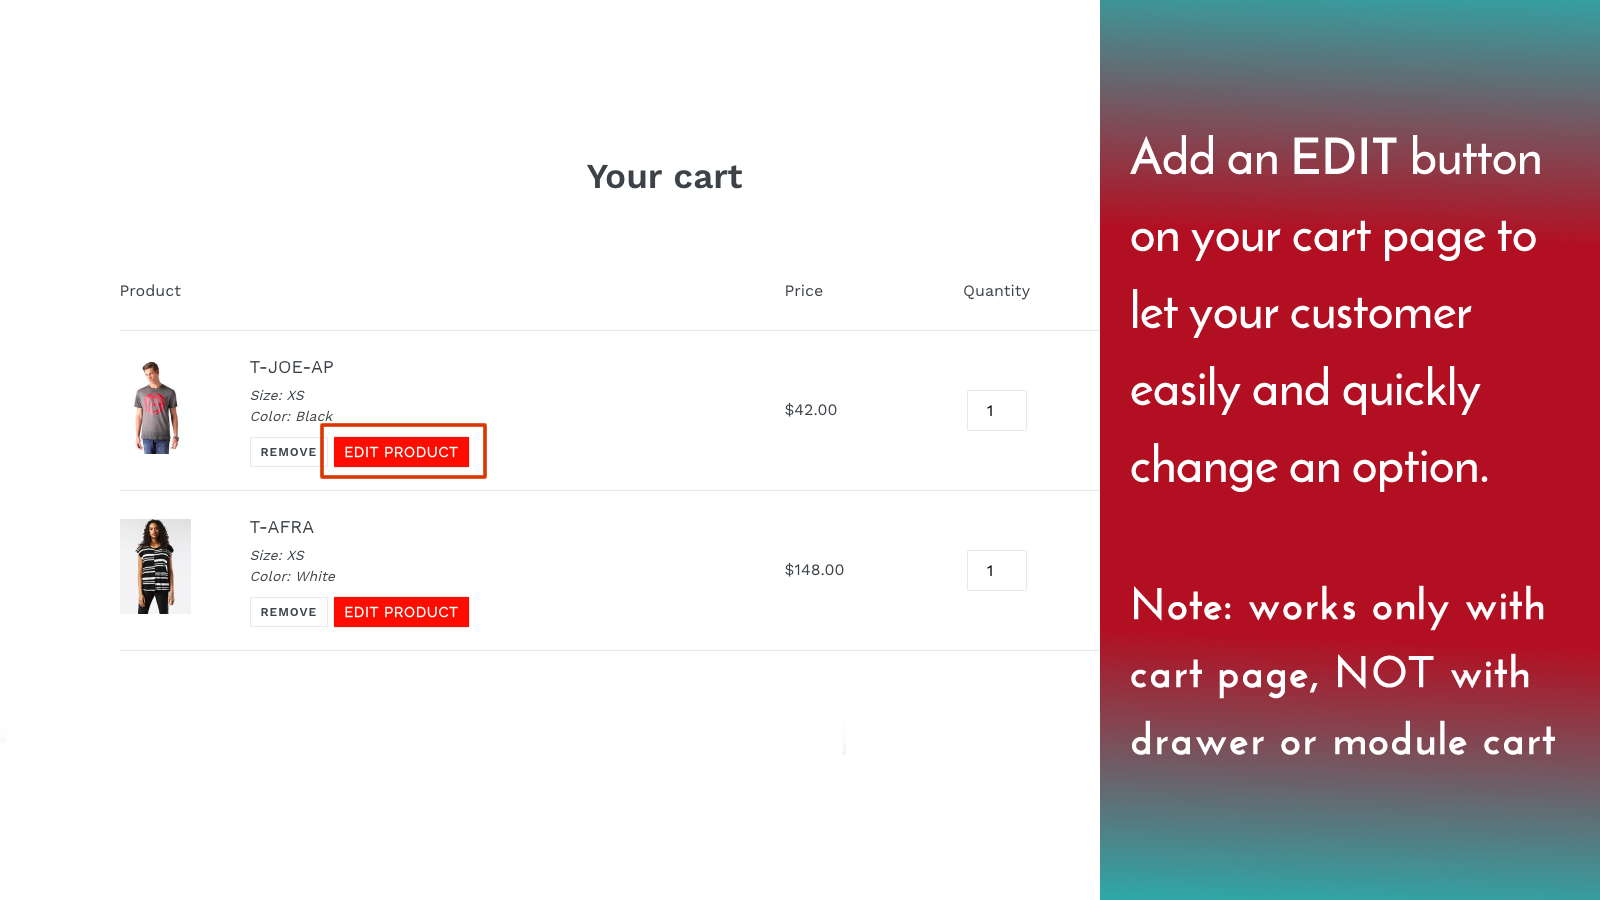 Edit product options in cart - change product options in the cart